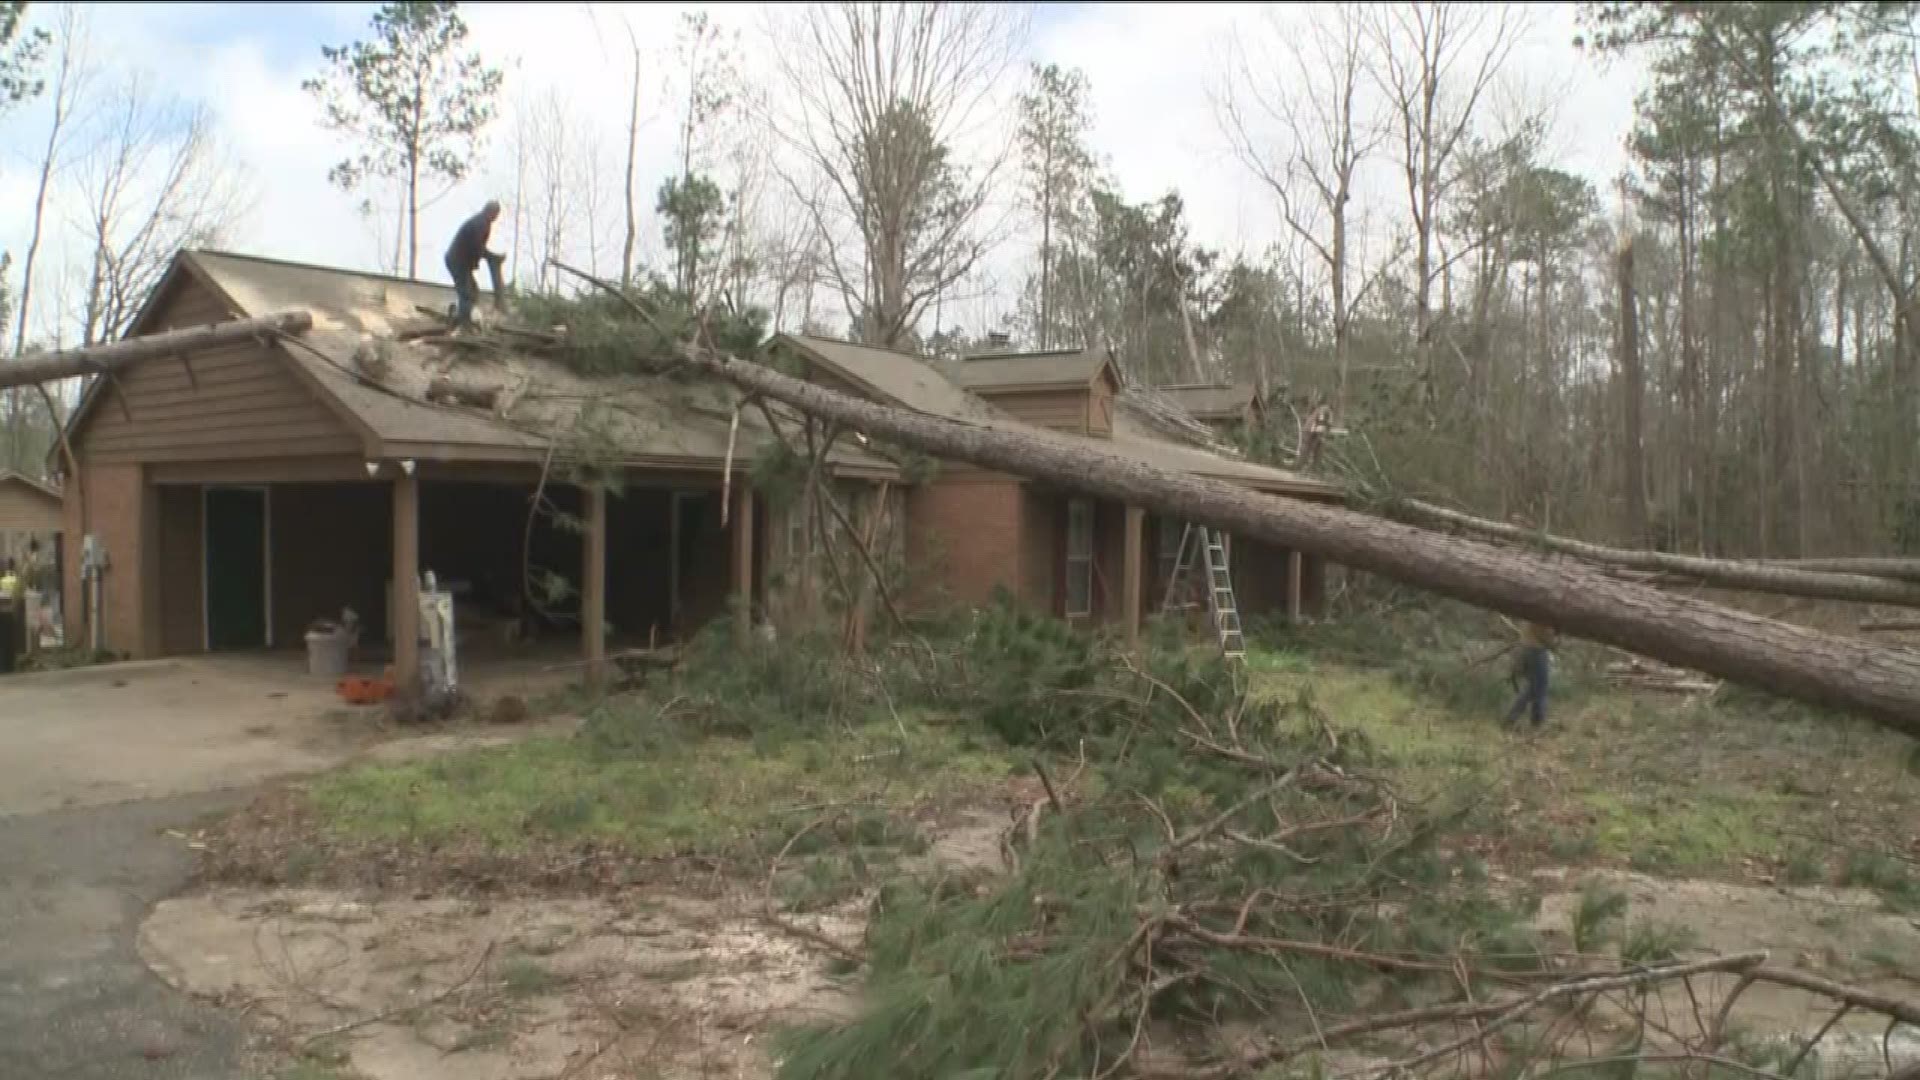 Georgia Gov. Brian Kemp issued an executive order Monday in Grady, Harris and Talbot counties to deploy state assistance in the wake of severe thunderstorms, precipitation and tornadoes over the weekend.